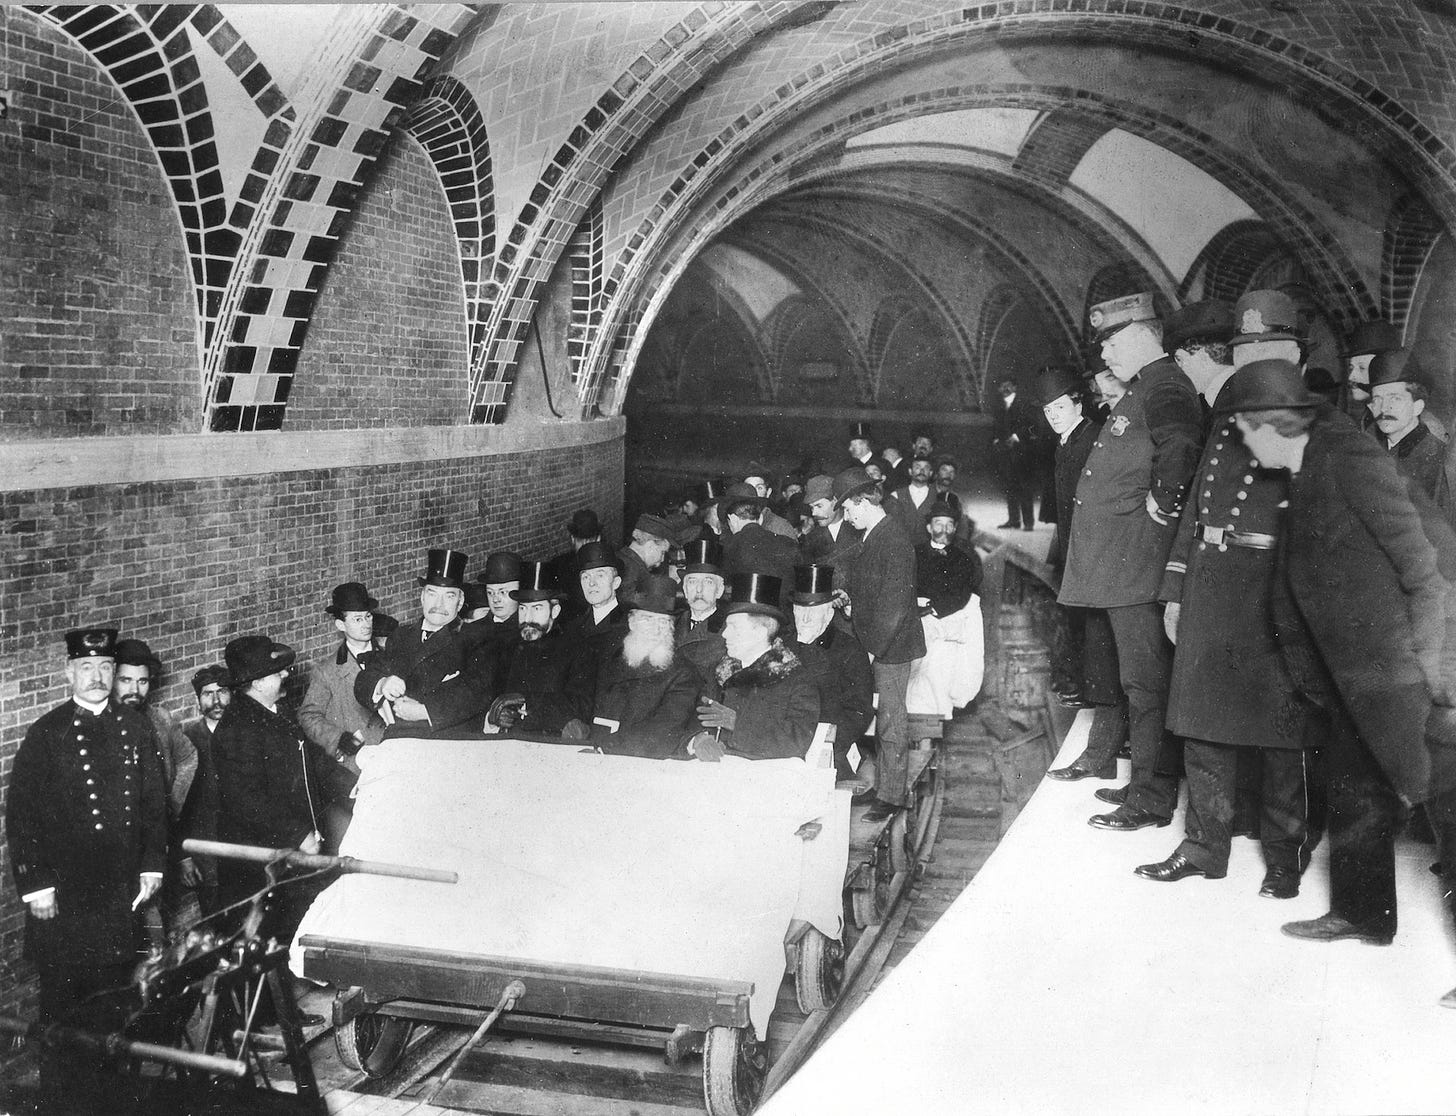 New York City Subway History: October 27 1904 First Day | Time